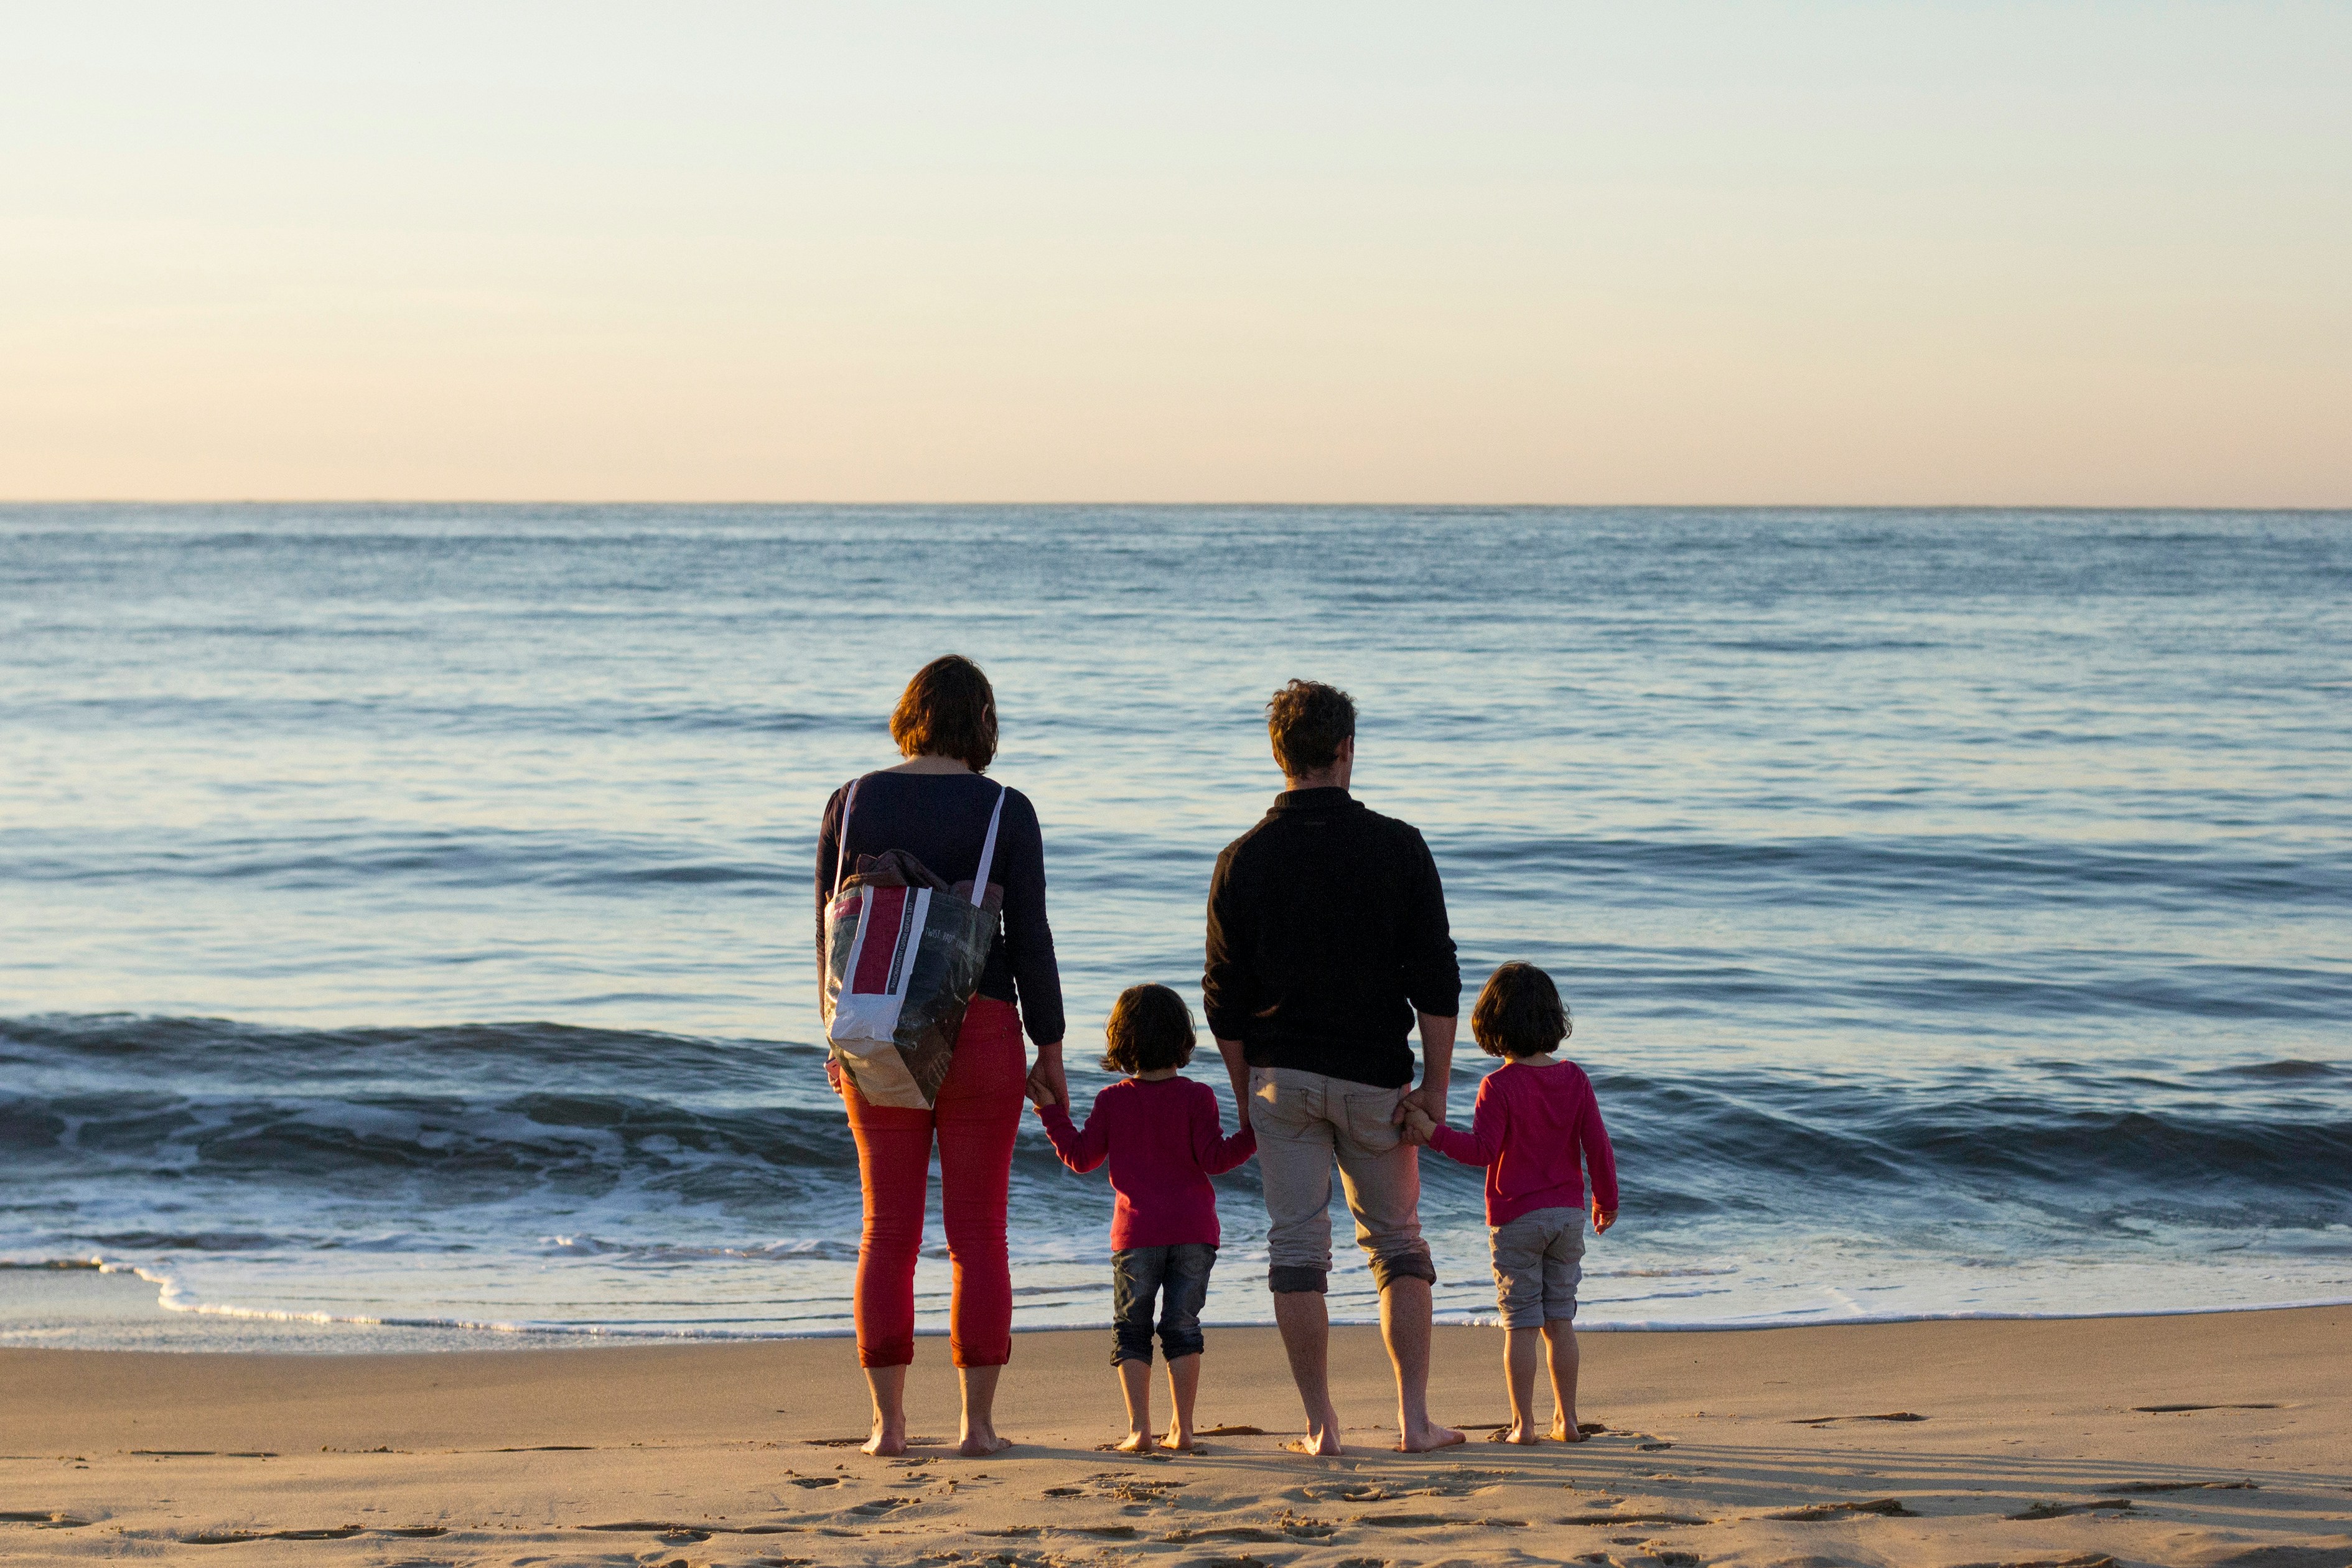 Benefits of Choosing an All-inclusive Family Vacation in Costa Rica